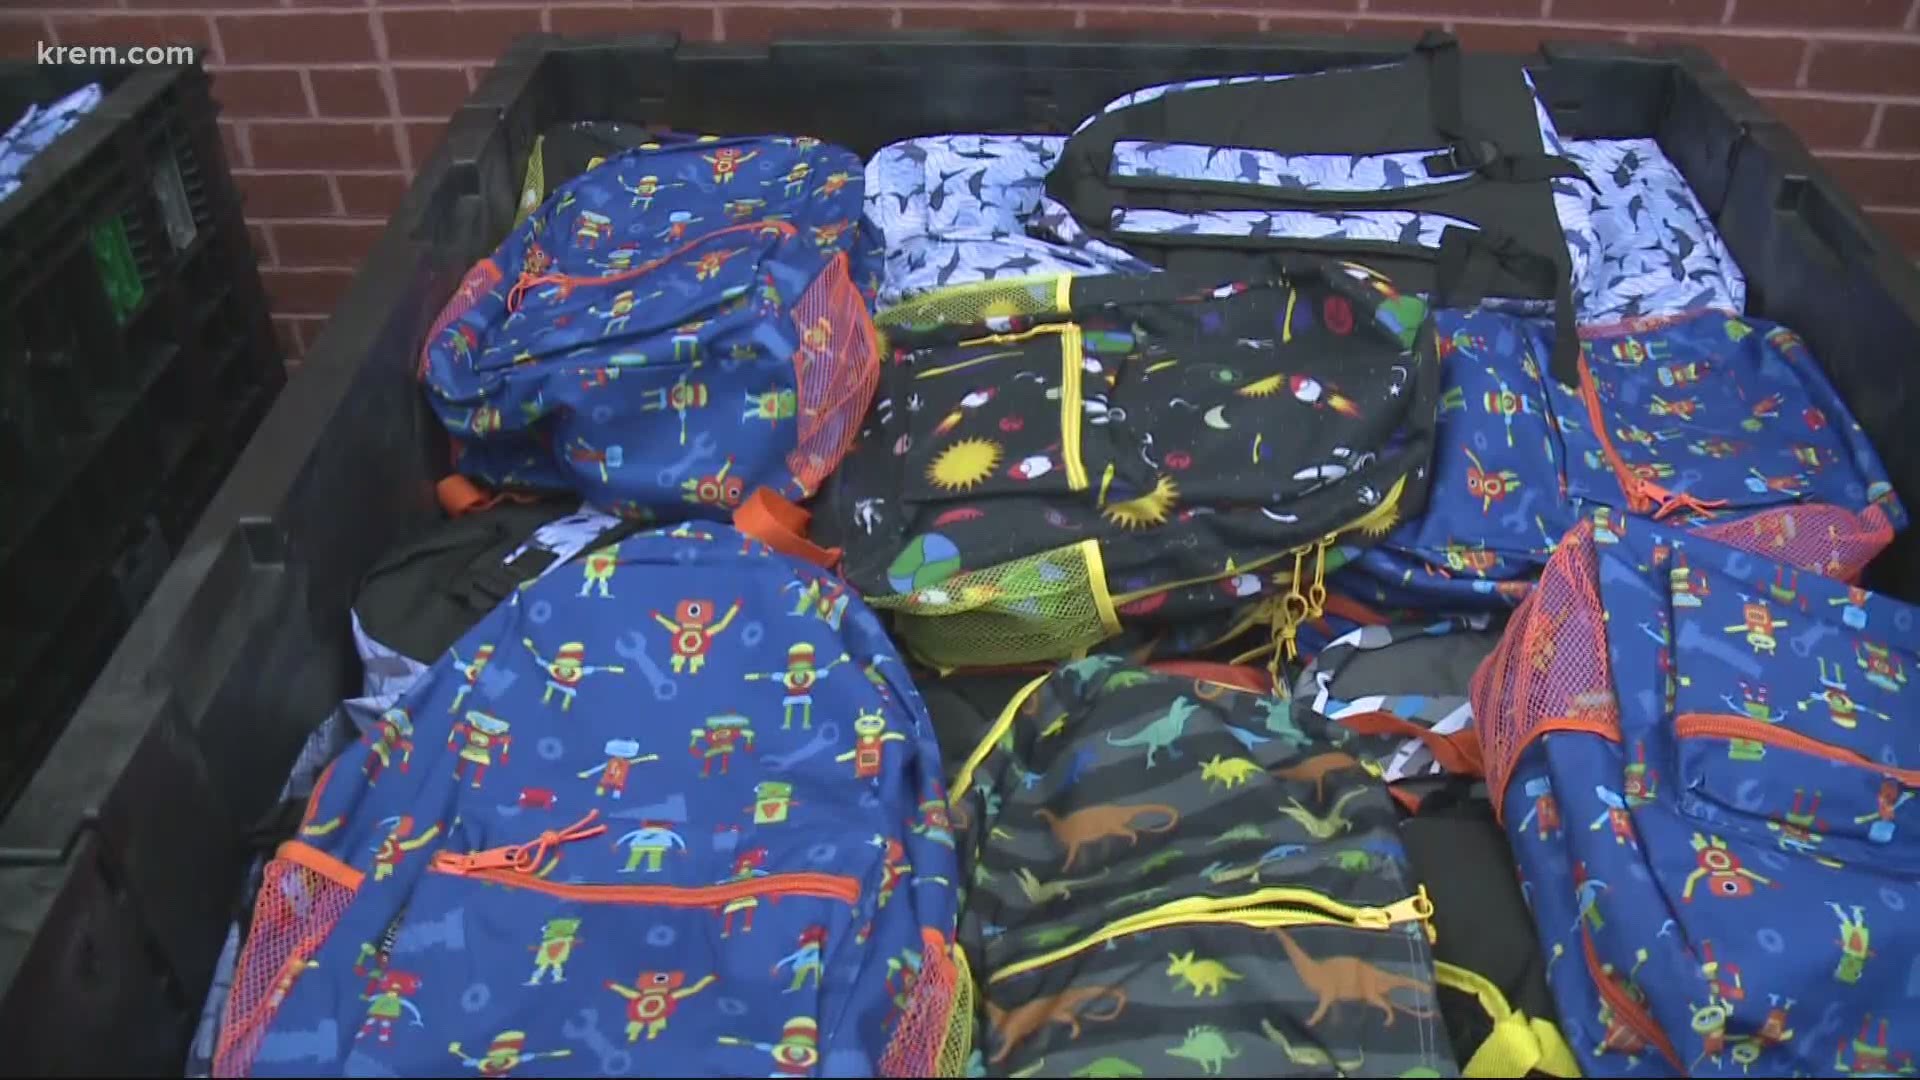 If your child needs some school supplies to start the year off right, the Salvation Army of Spokane has you covered.